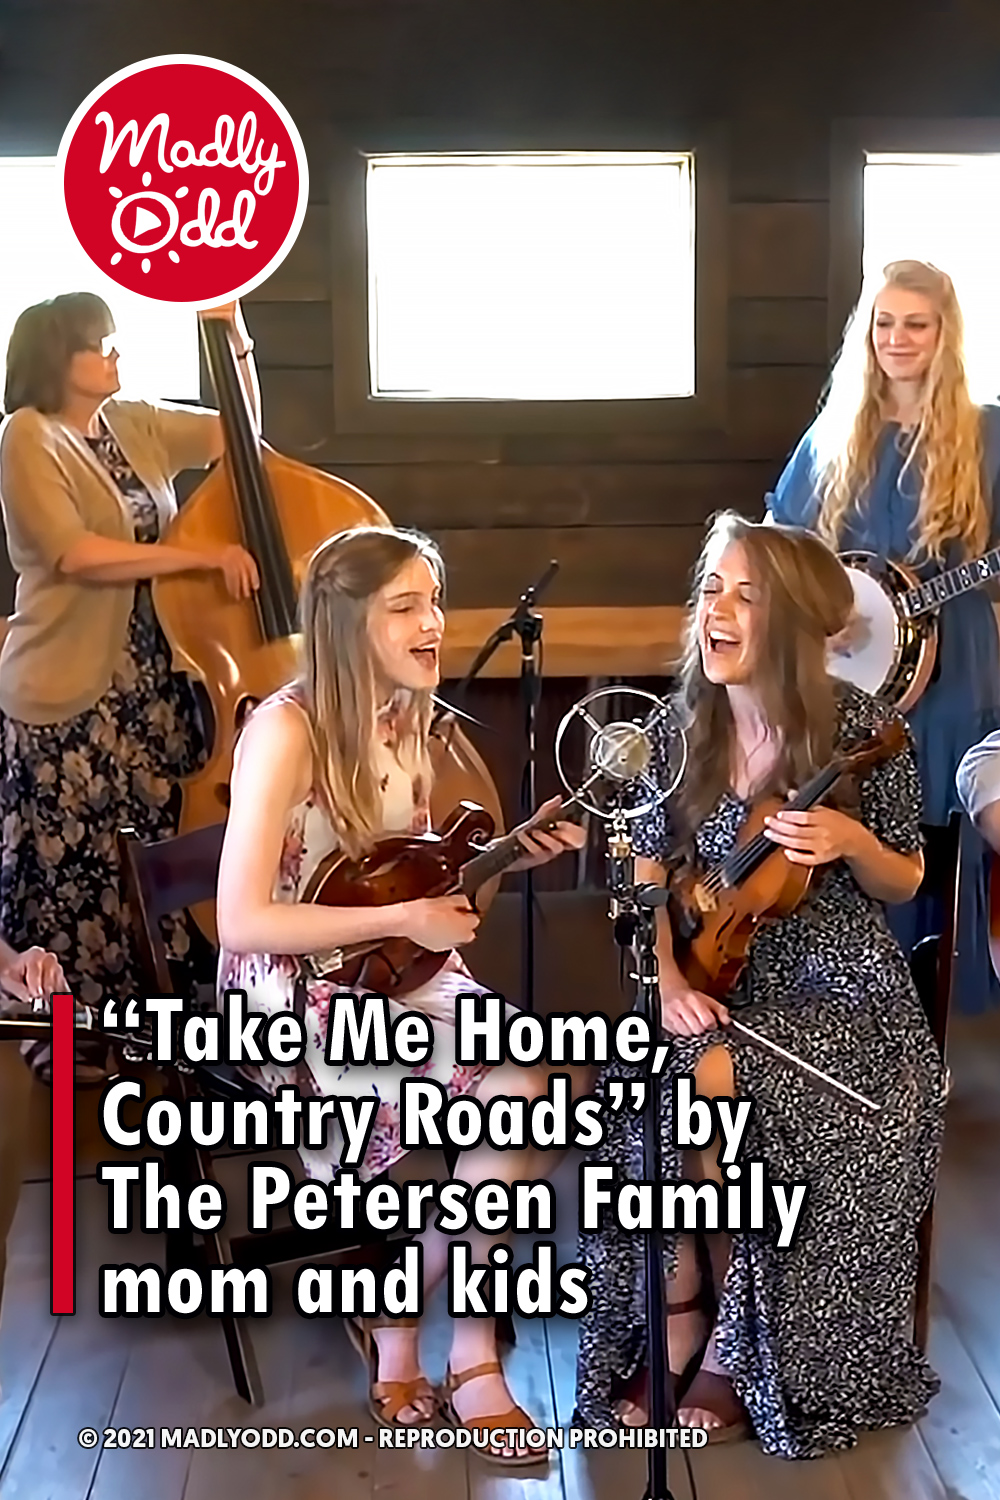 “Take Me Home, Country Roads” by The Petersen Family mom and kids